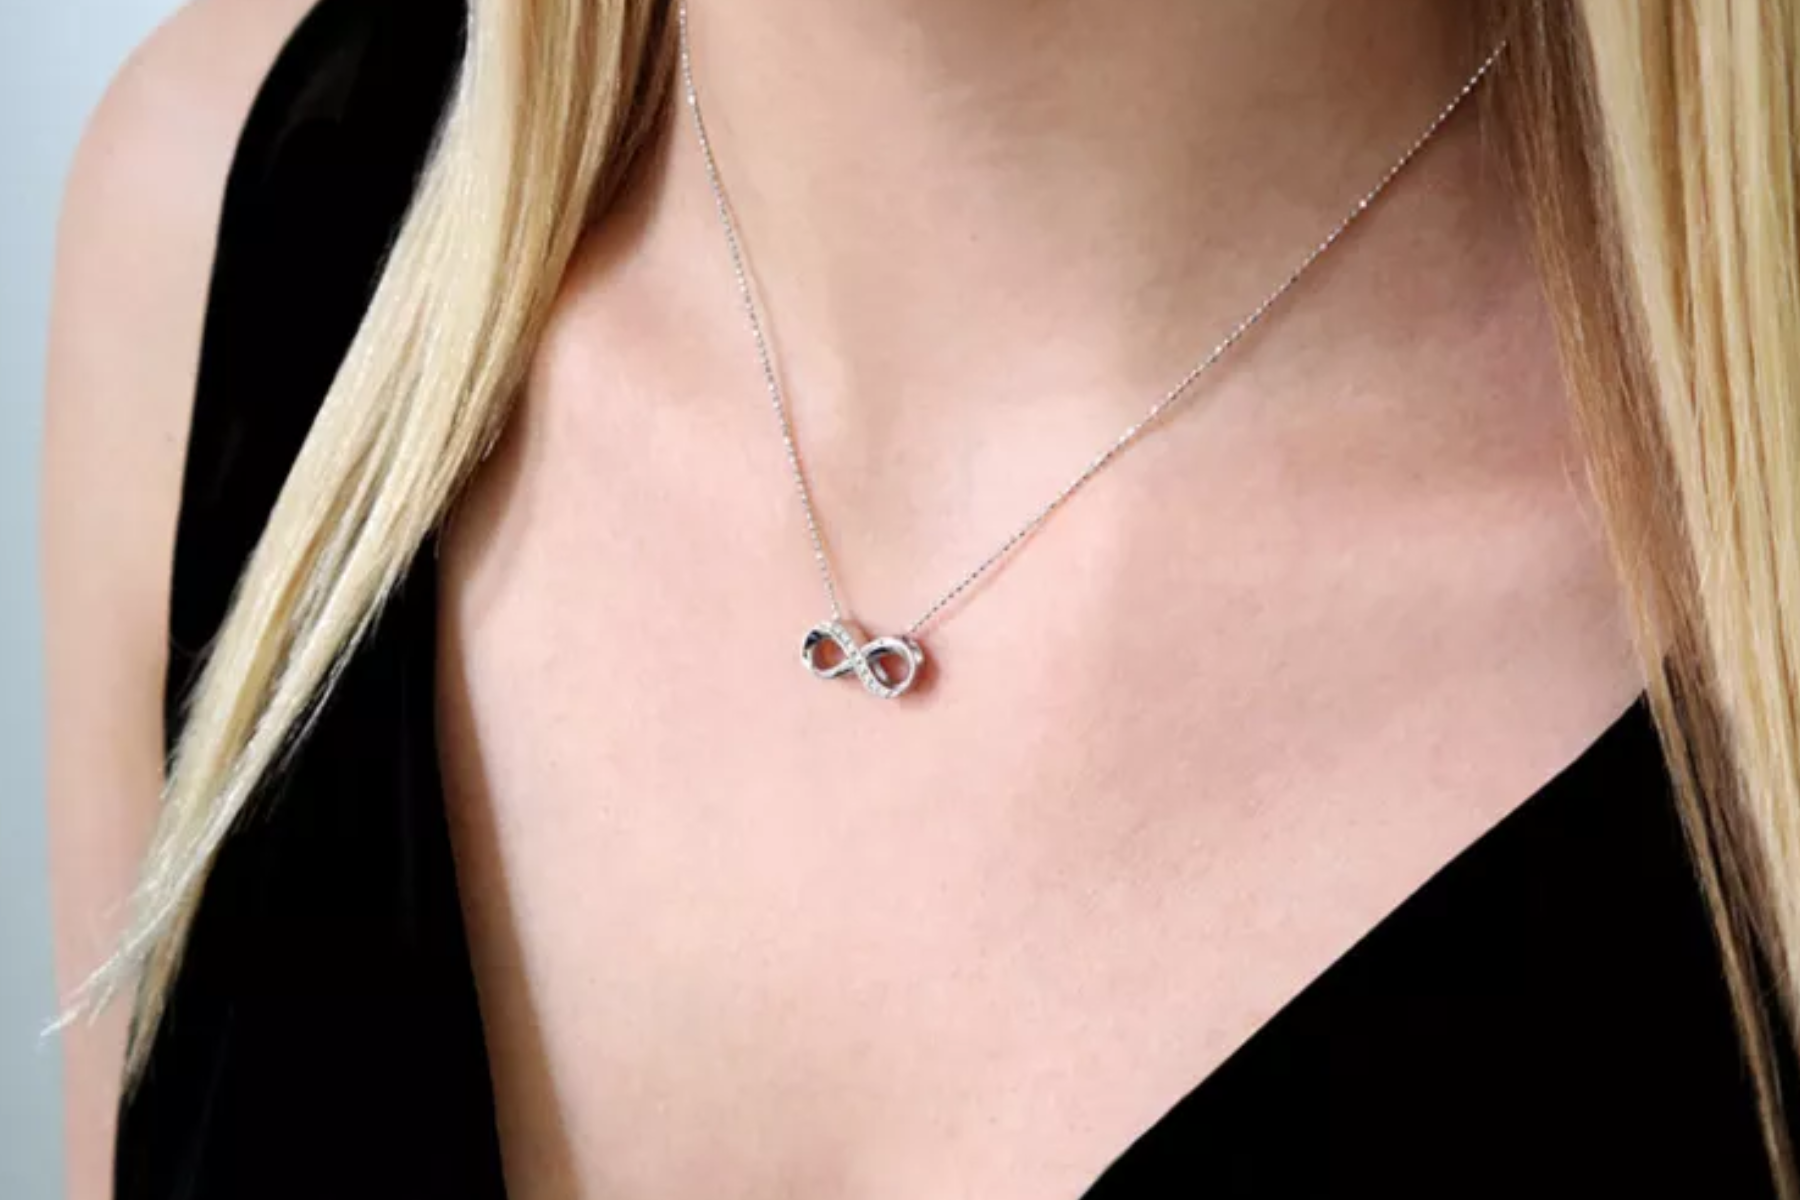 A silver infinity necklace is worn by a blonde woman